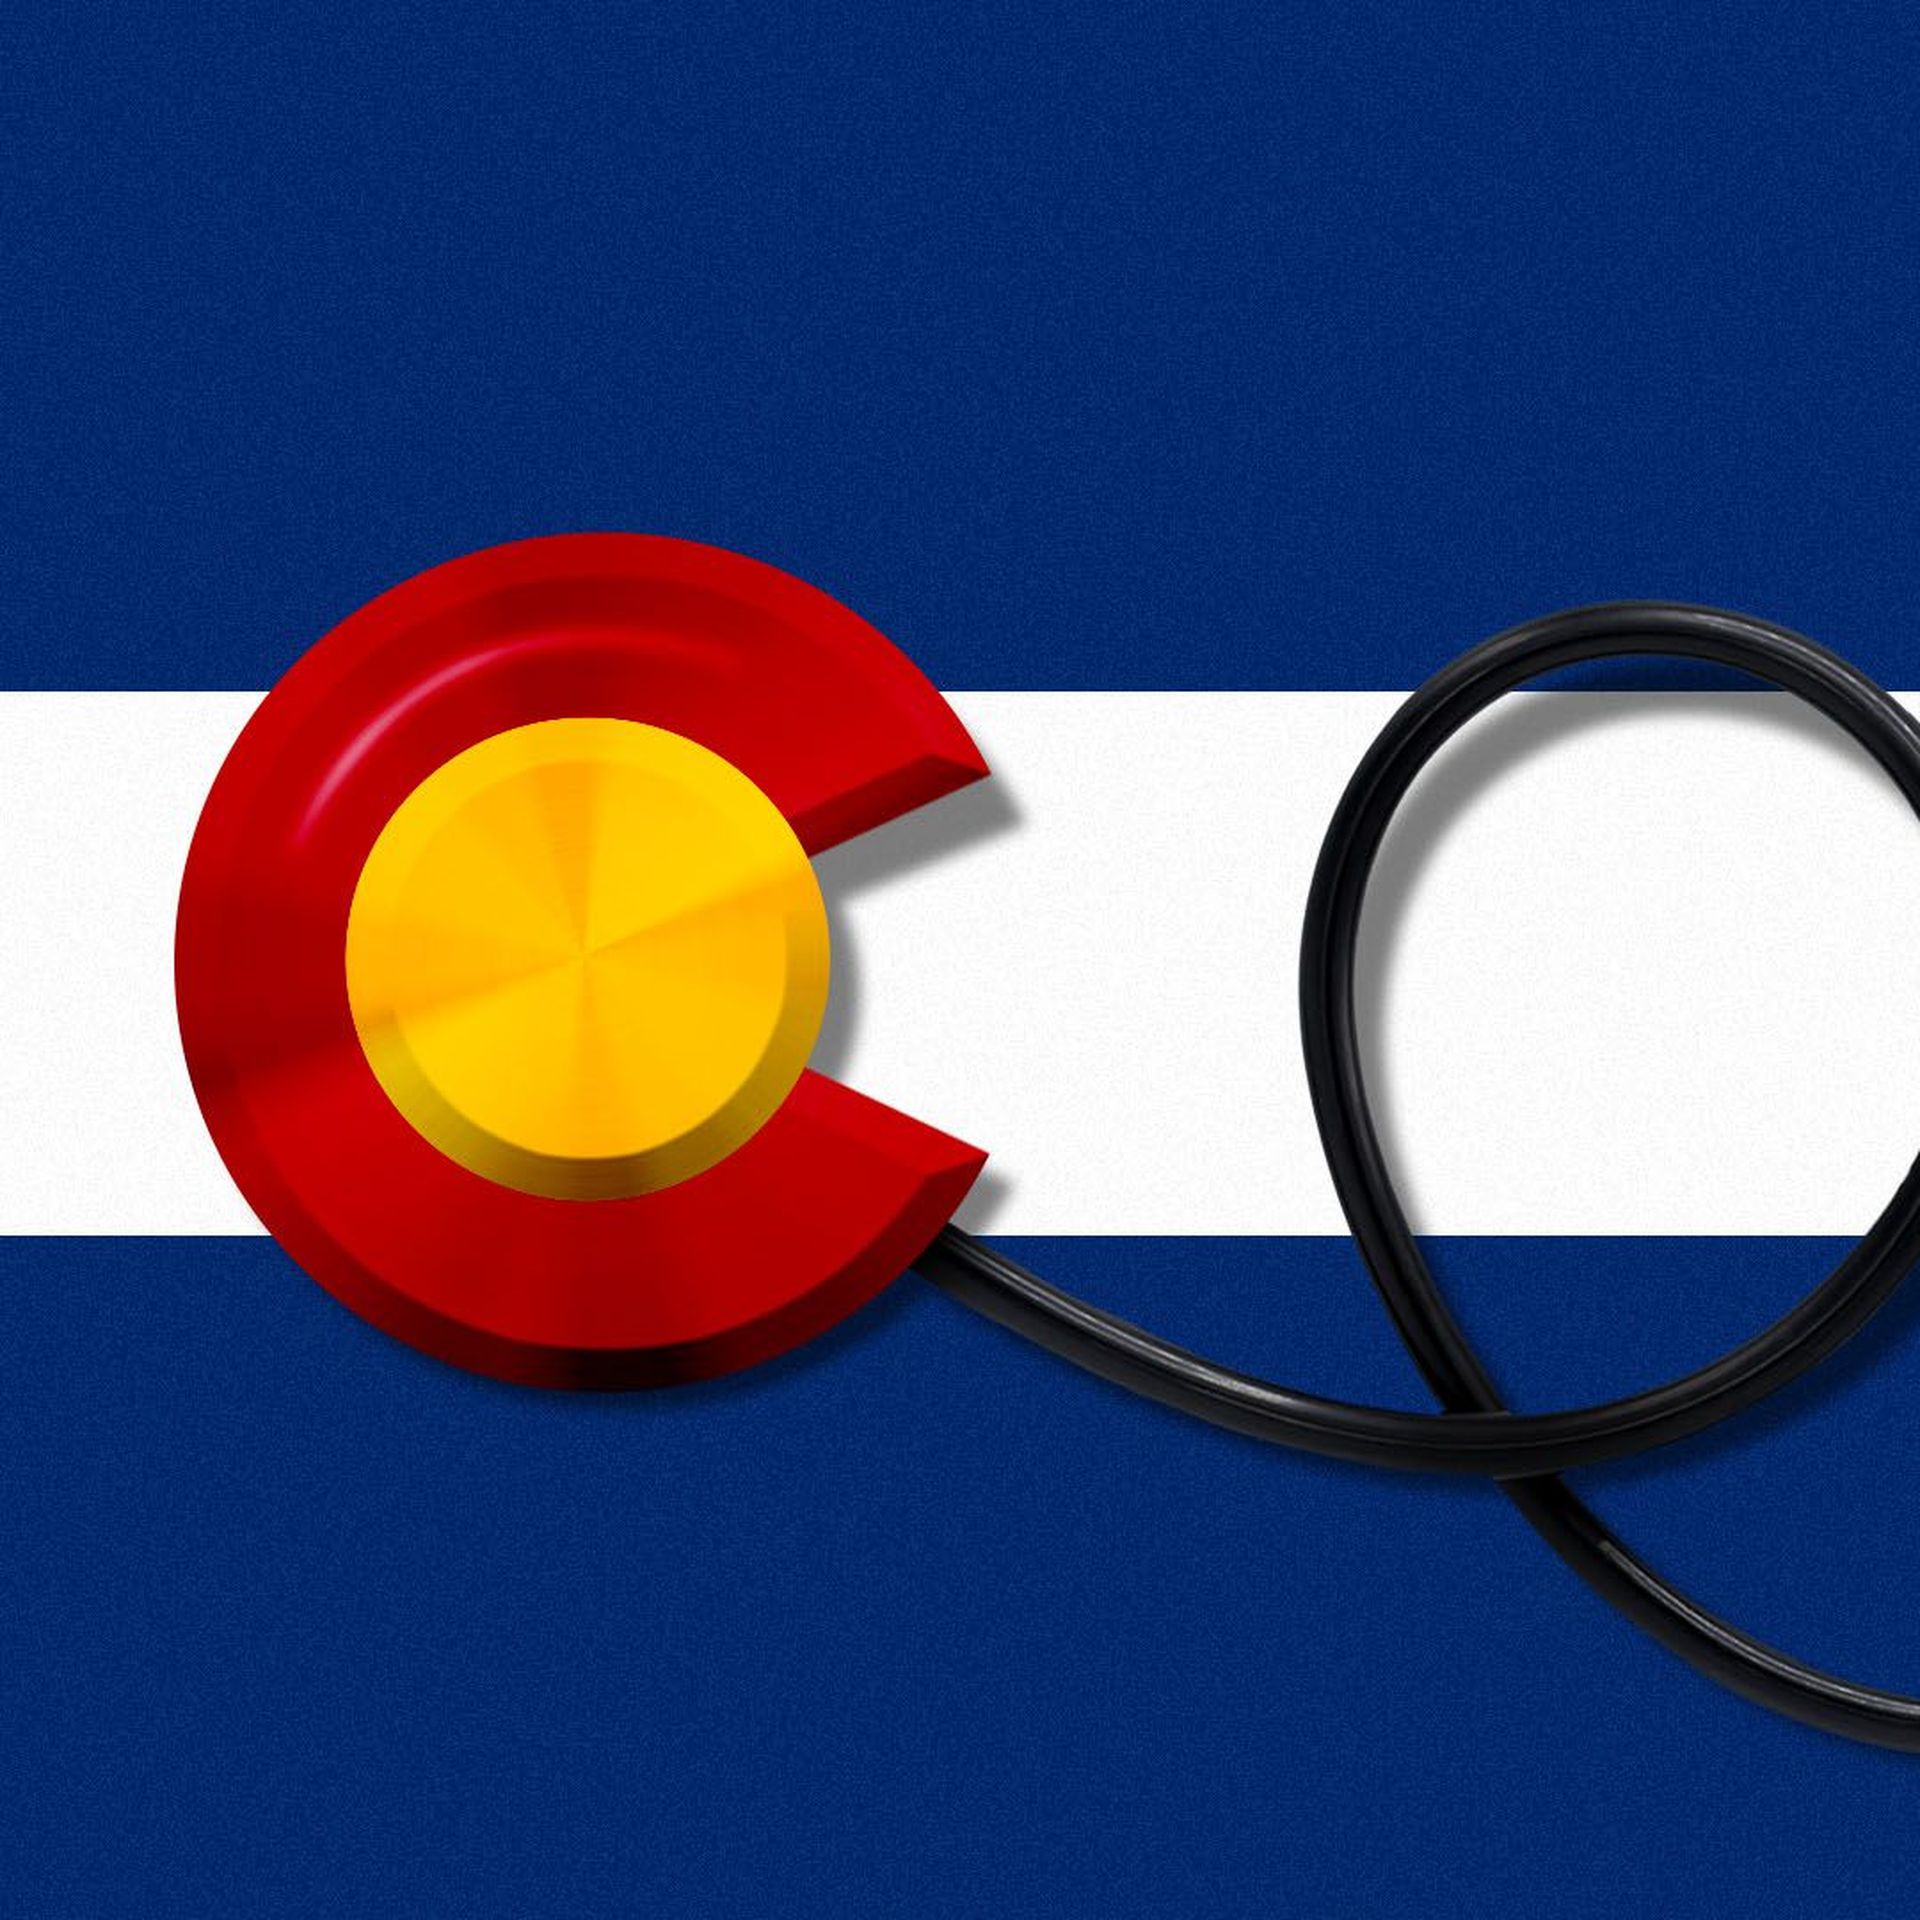 Illustration of a stethoscope in the shape of a Colorado flag